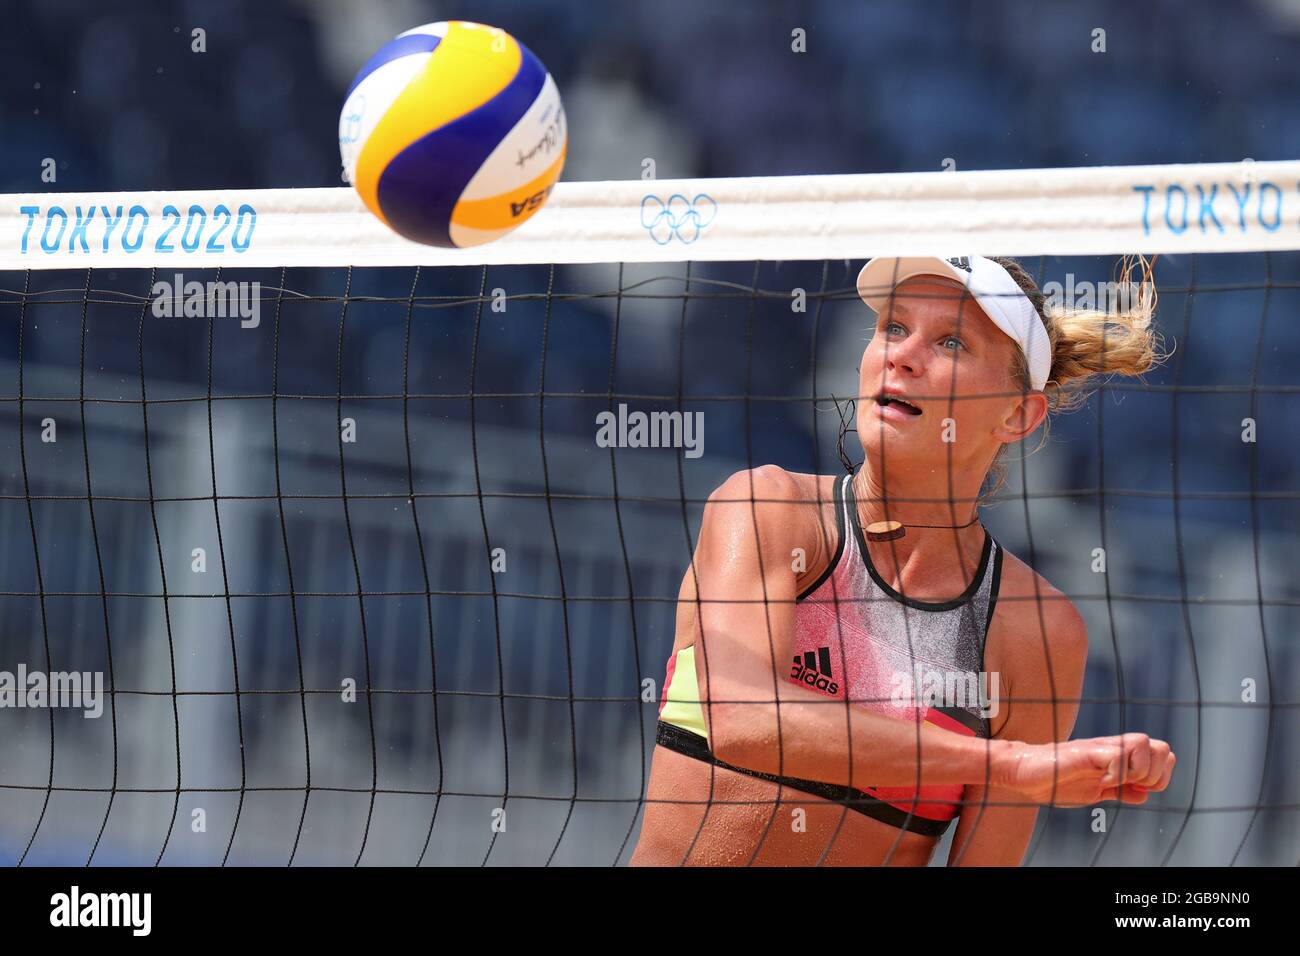 Tokyo, Japan, 3 August, 2021. Margareta Kozuch of Team Germany hits the ball over the net during the Women's Beach Volleyball Quarterfinal match between Germany and USA on Day 11 of the Tokyo 2020 Olympic Games. Credit: Pete Dovgan/Speed Media/Alamy Live News Stock Photo